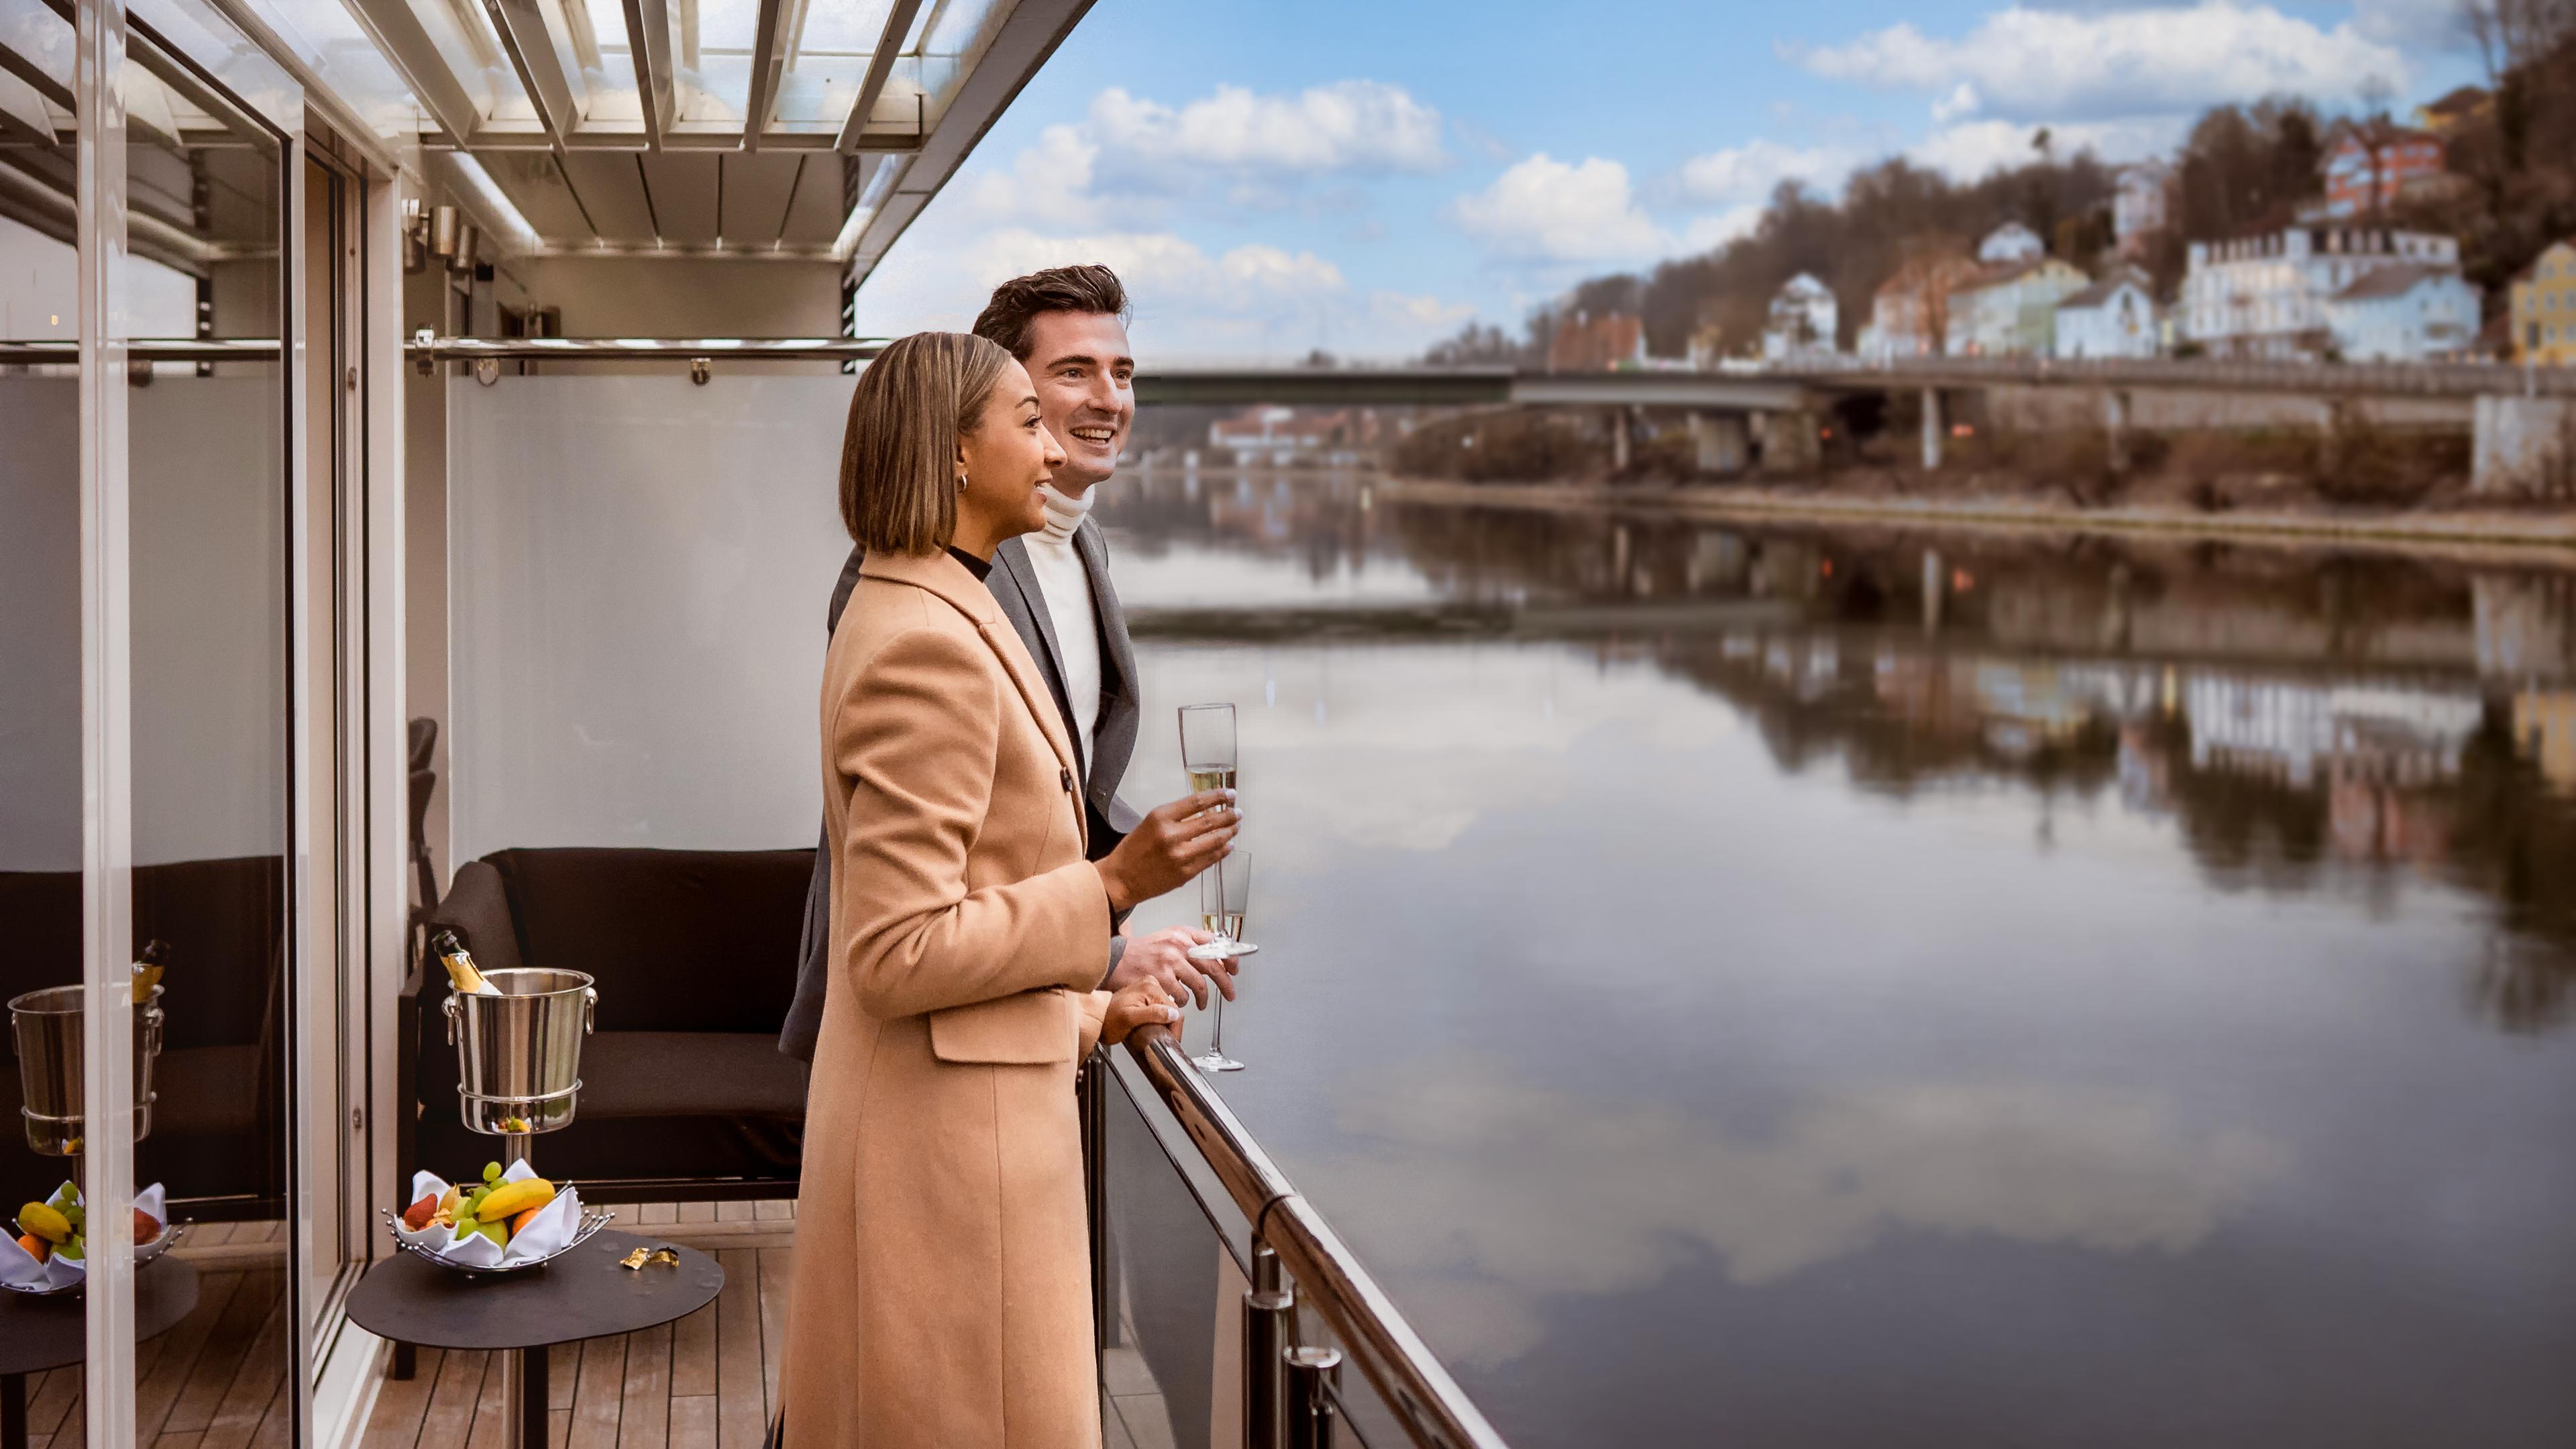 20% Savings on Select Sailings with AmaWaterways